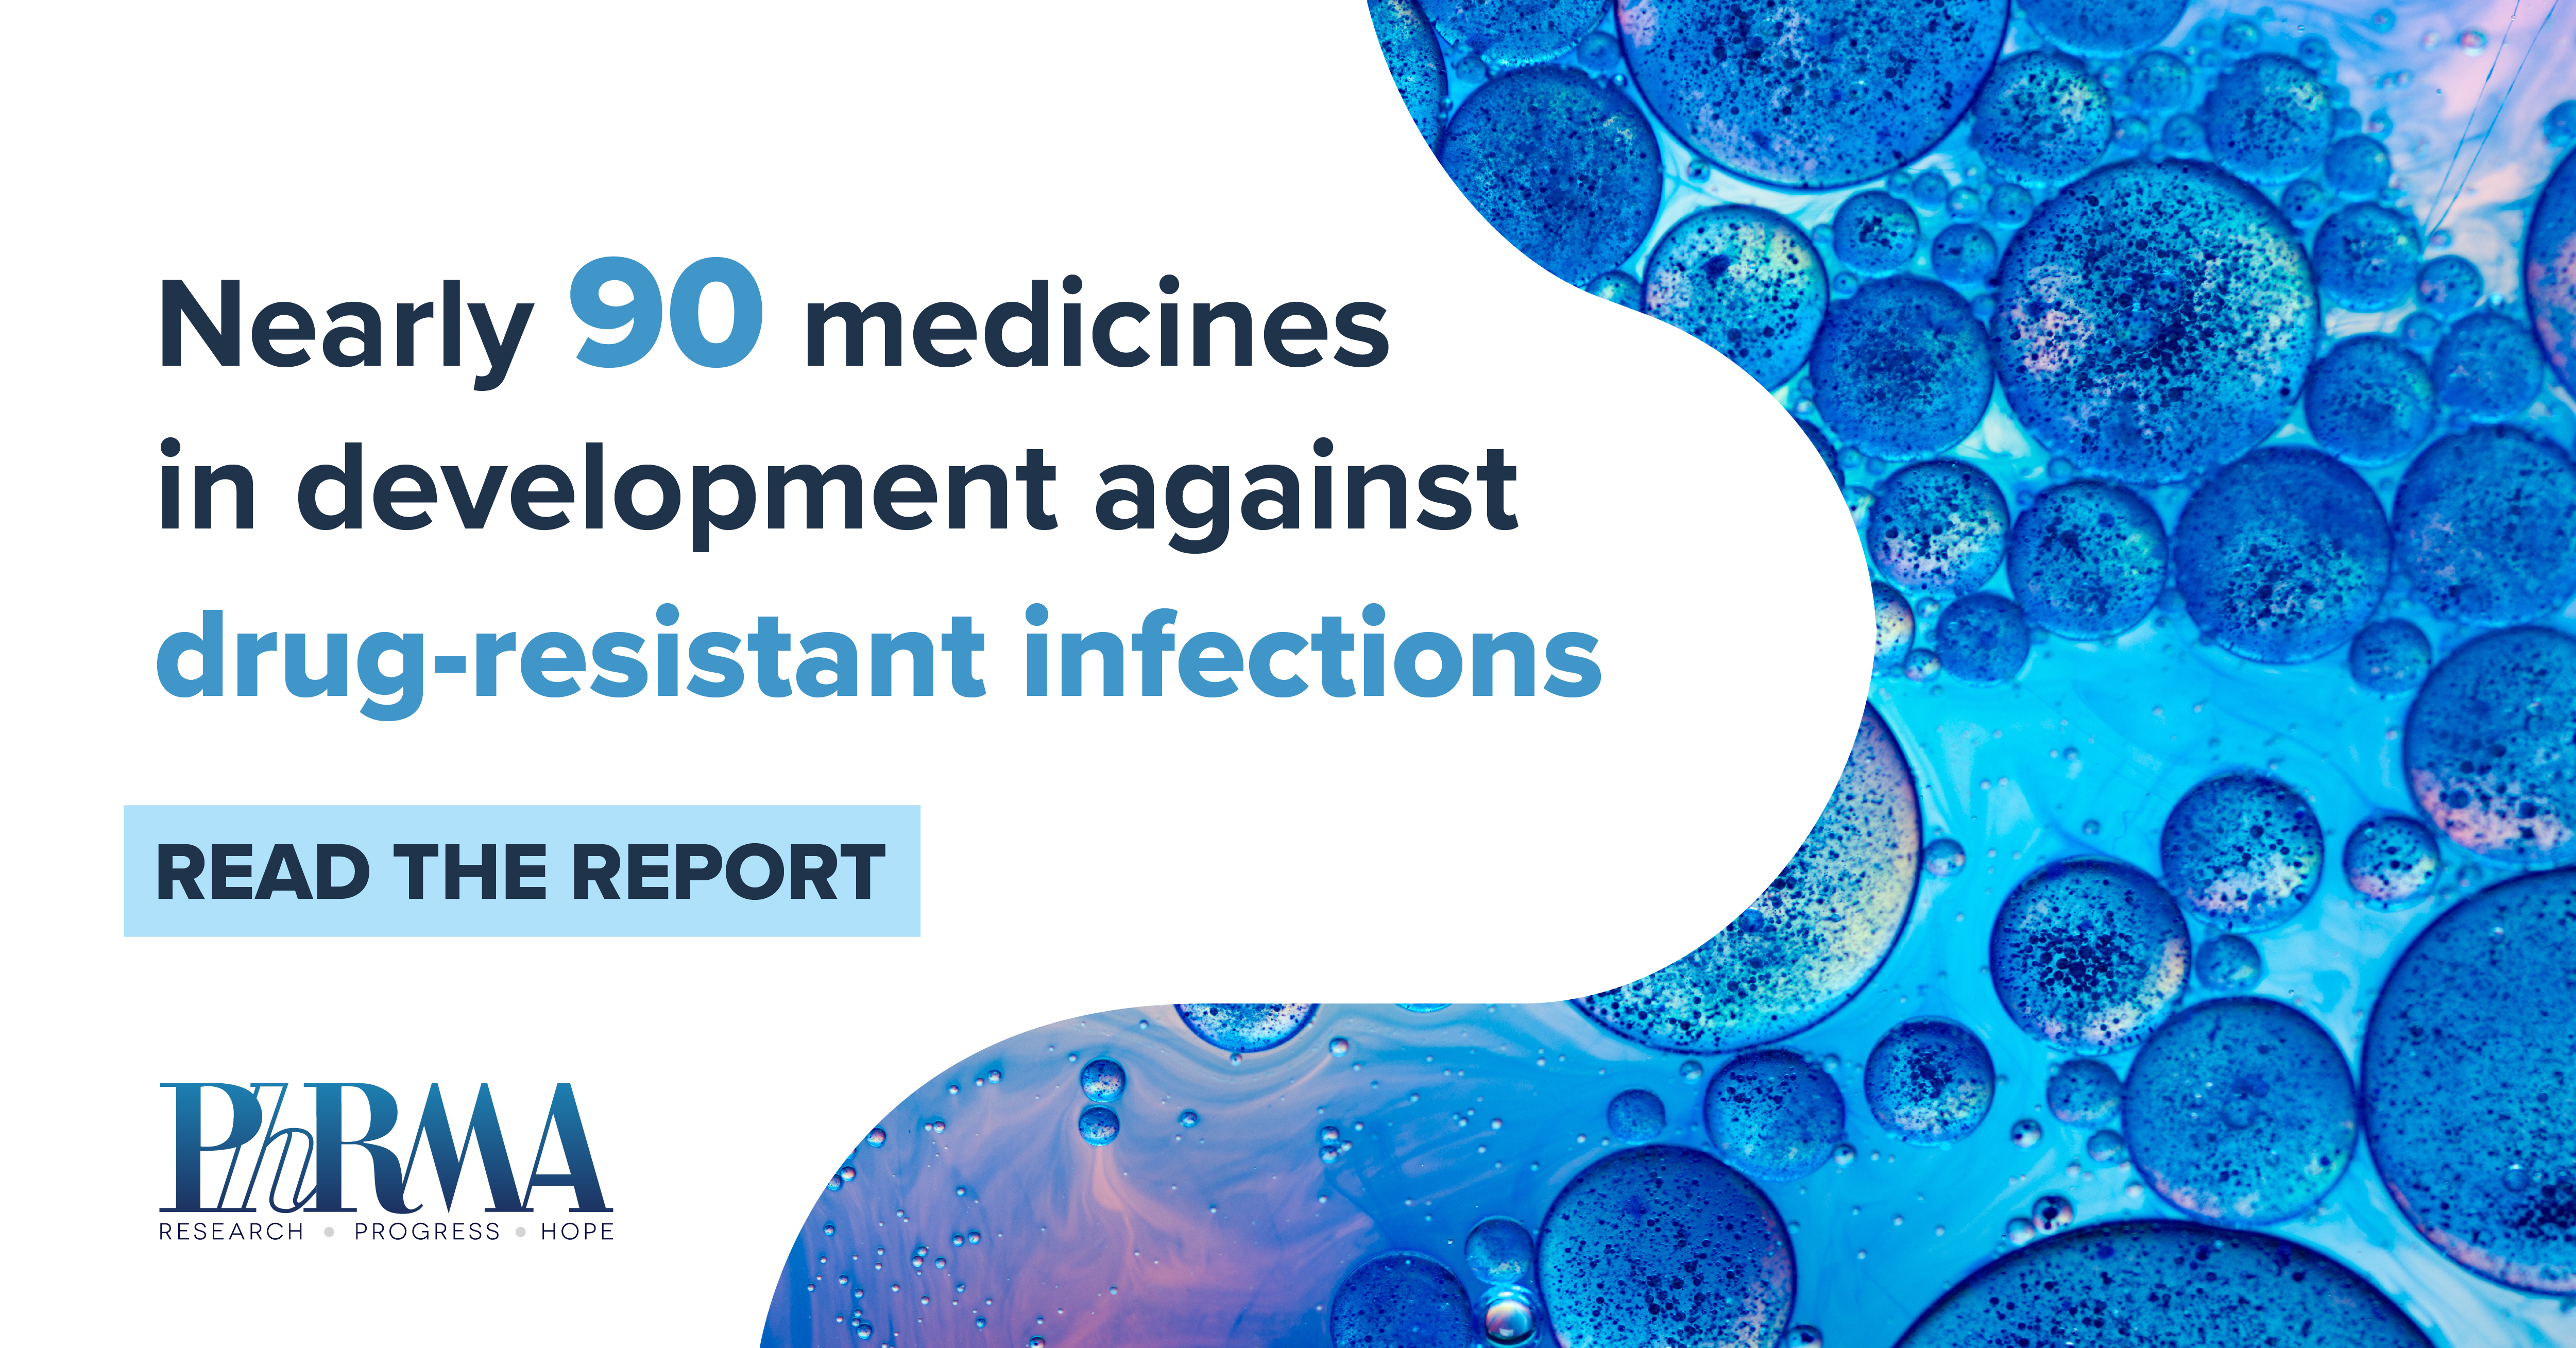 New PhRMA report shows nearly 90 medicines in development to fight drug-resistant infections, but future pipeline remains challenging